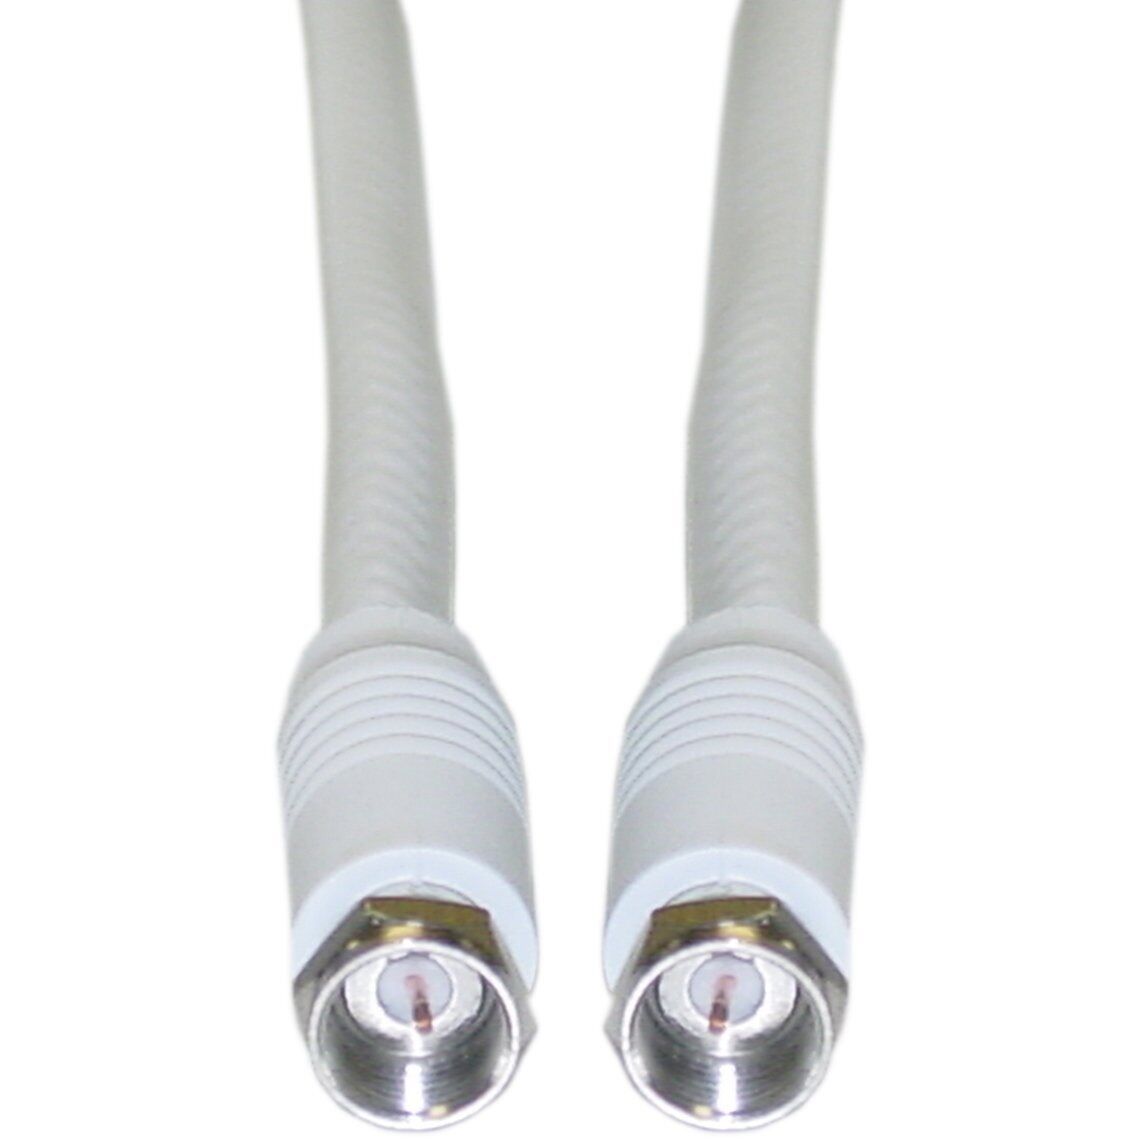 Gadko F-pin Rg6 Coaxial Cable, White, F-pin Male, Ul Rated, 25 Foot - New